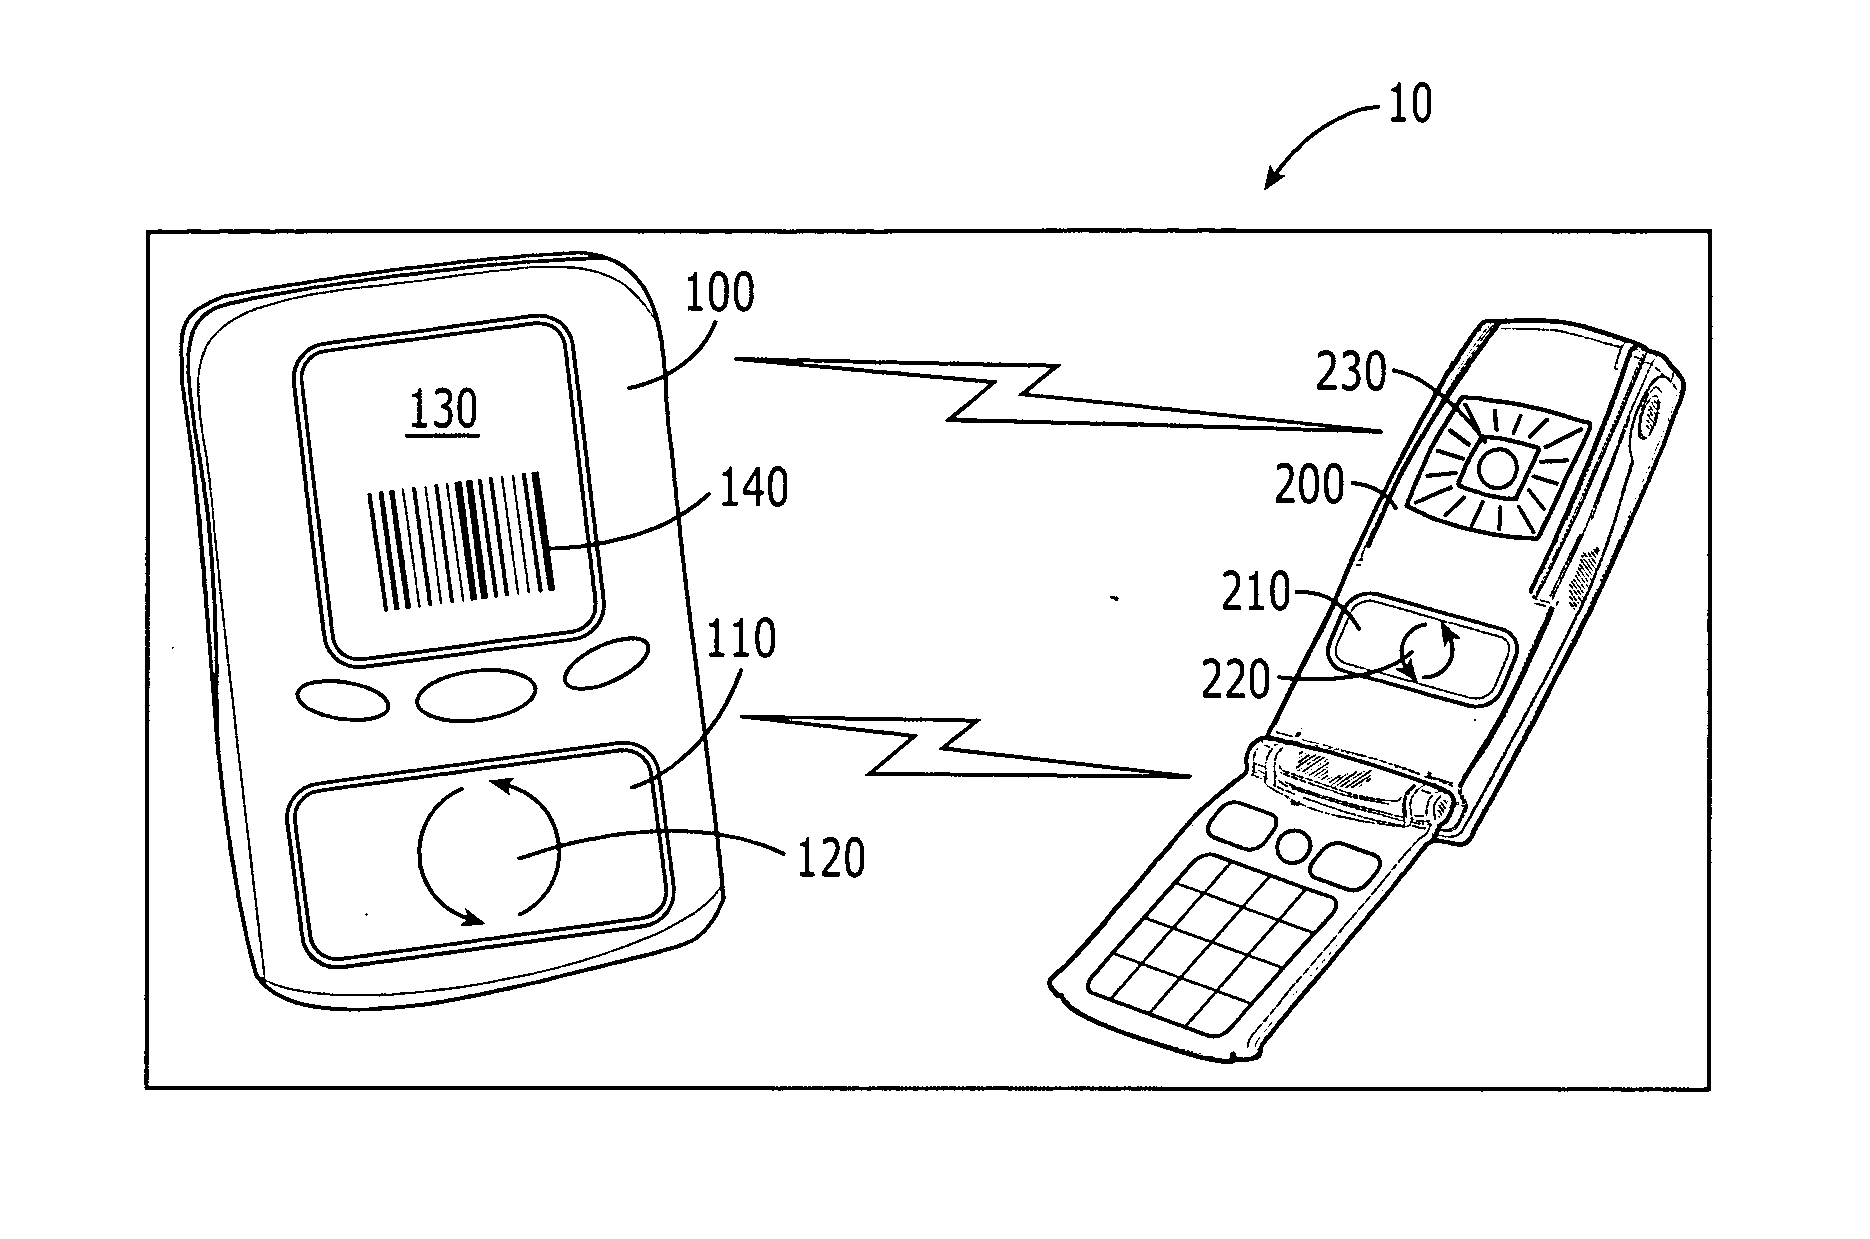 Visual encoding of a content address to facilitate data transfer in digital devices